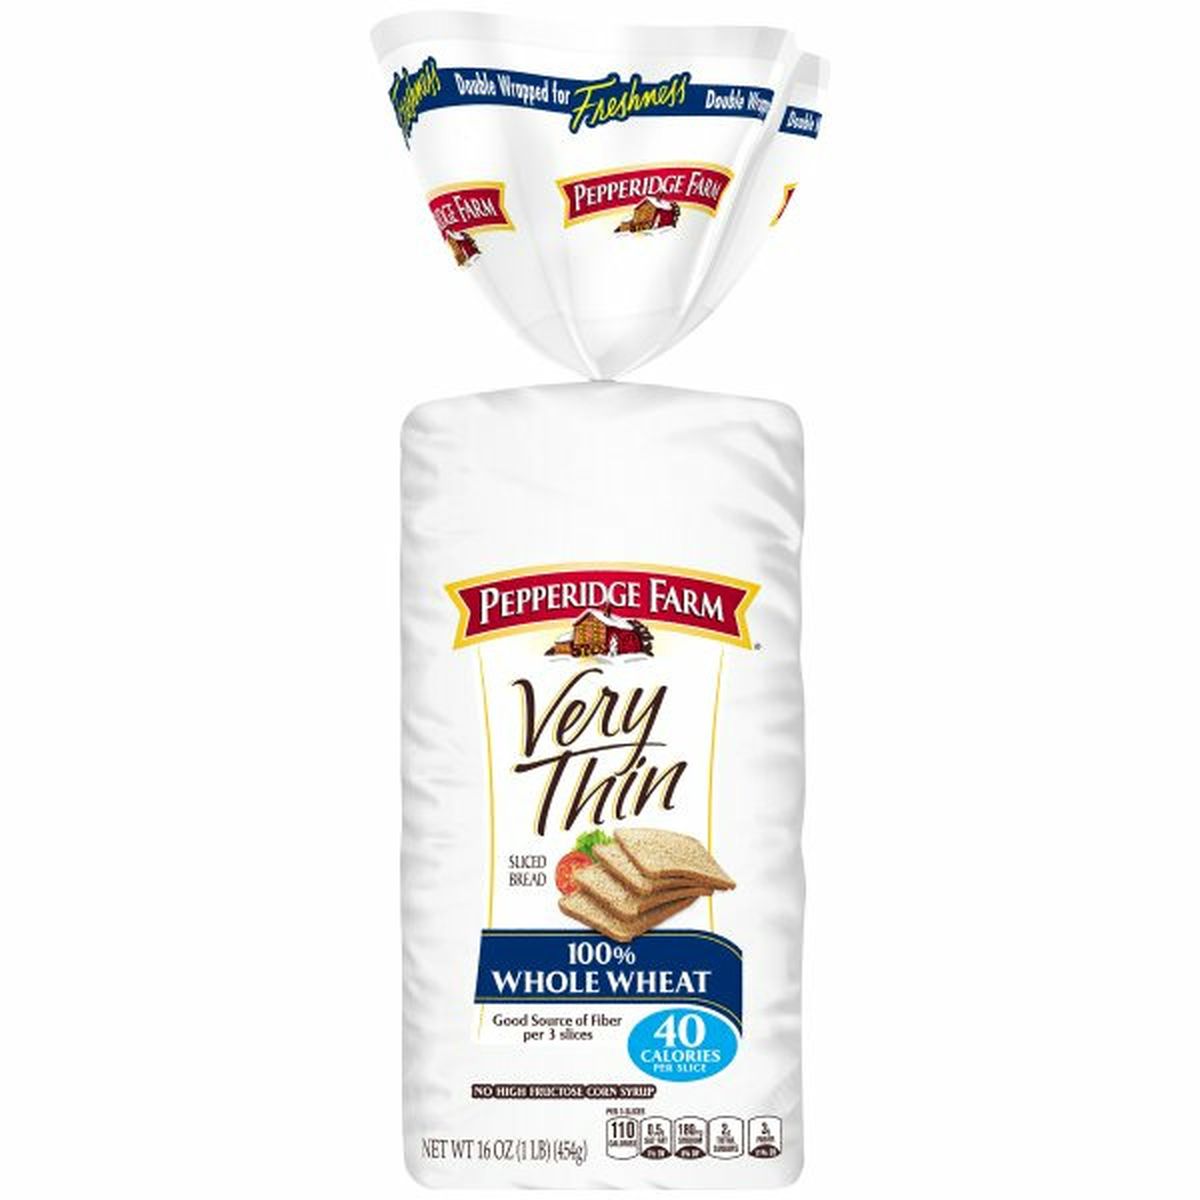 Calories in Pepperidge Farms  Very Thin Very Thin 100% Whole Wheat Bread